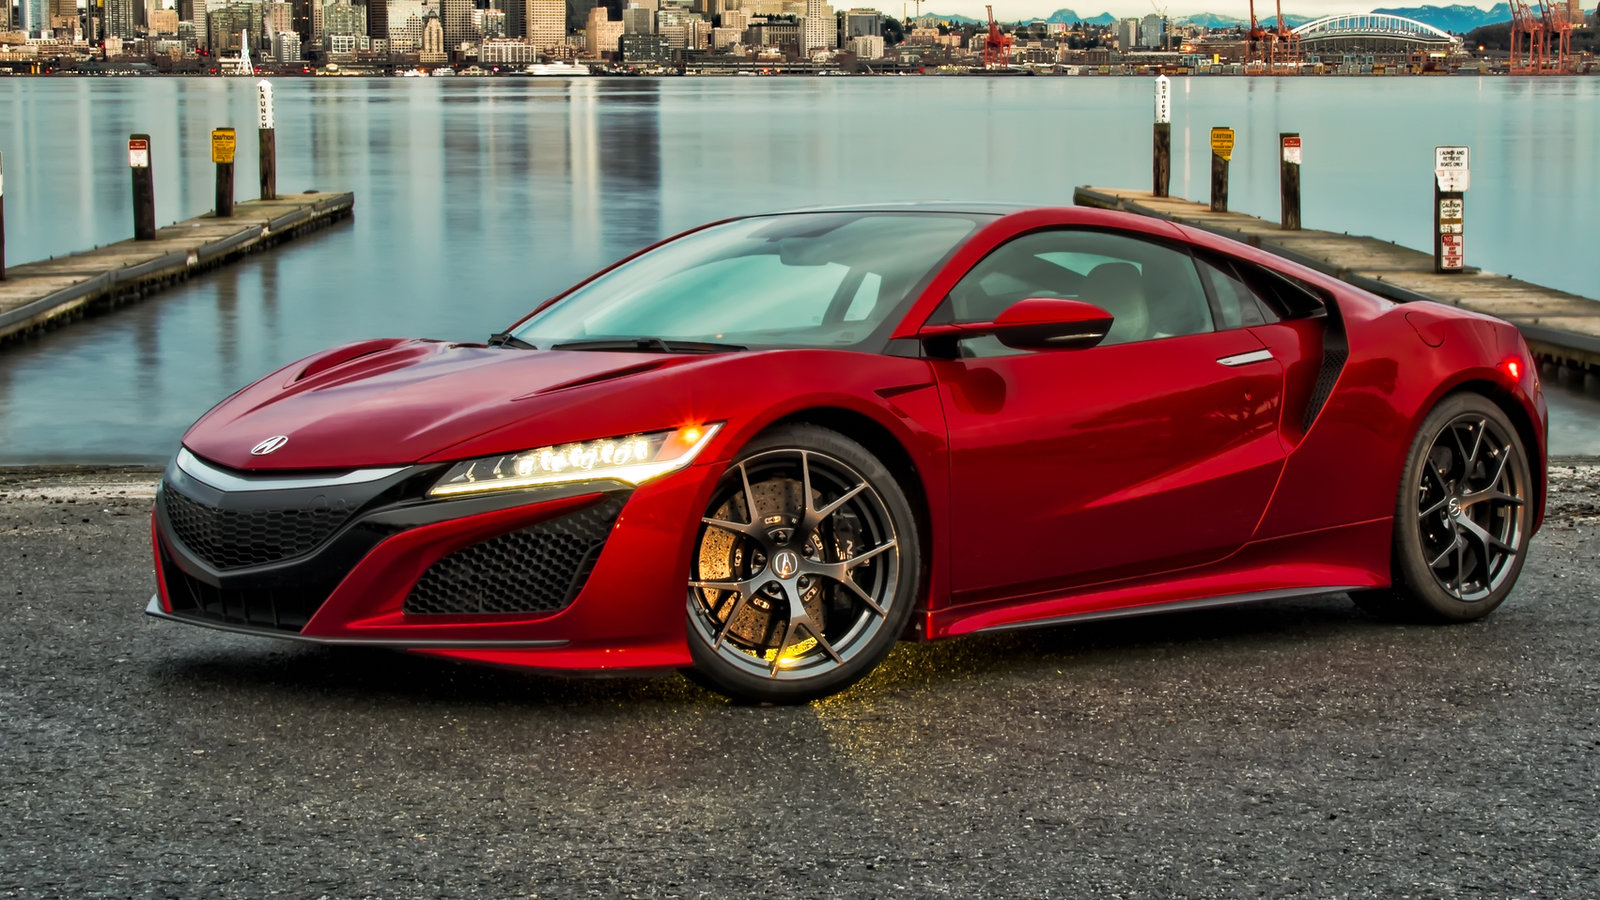 Video Review: Acura NSX, a Supercar in Almost All Ways - The New York Times